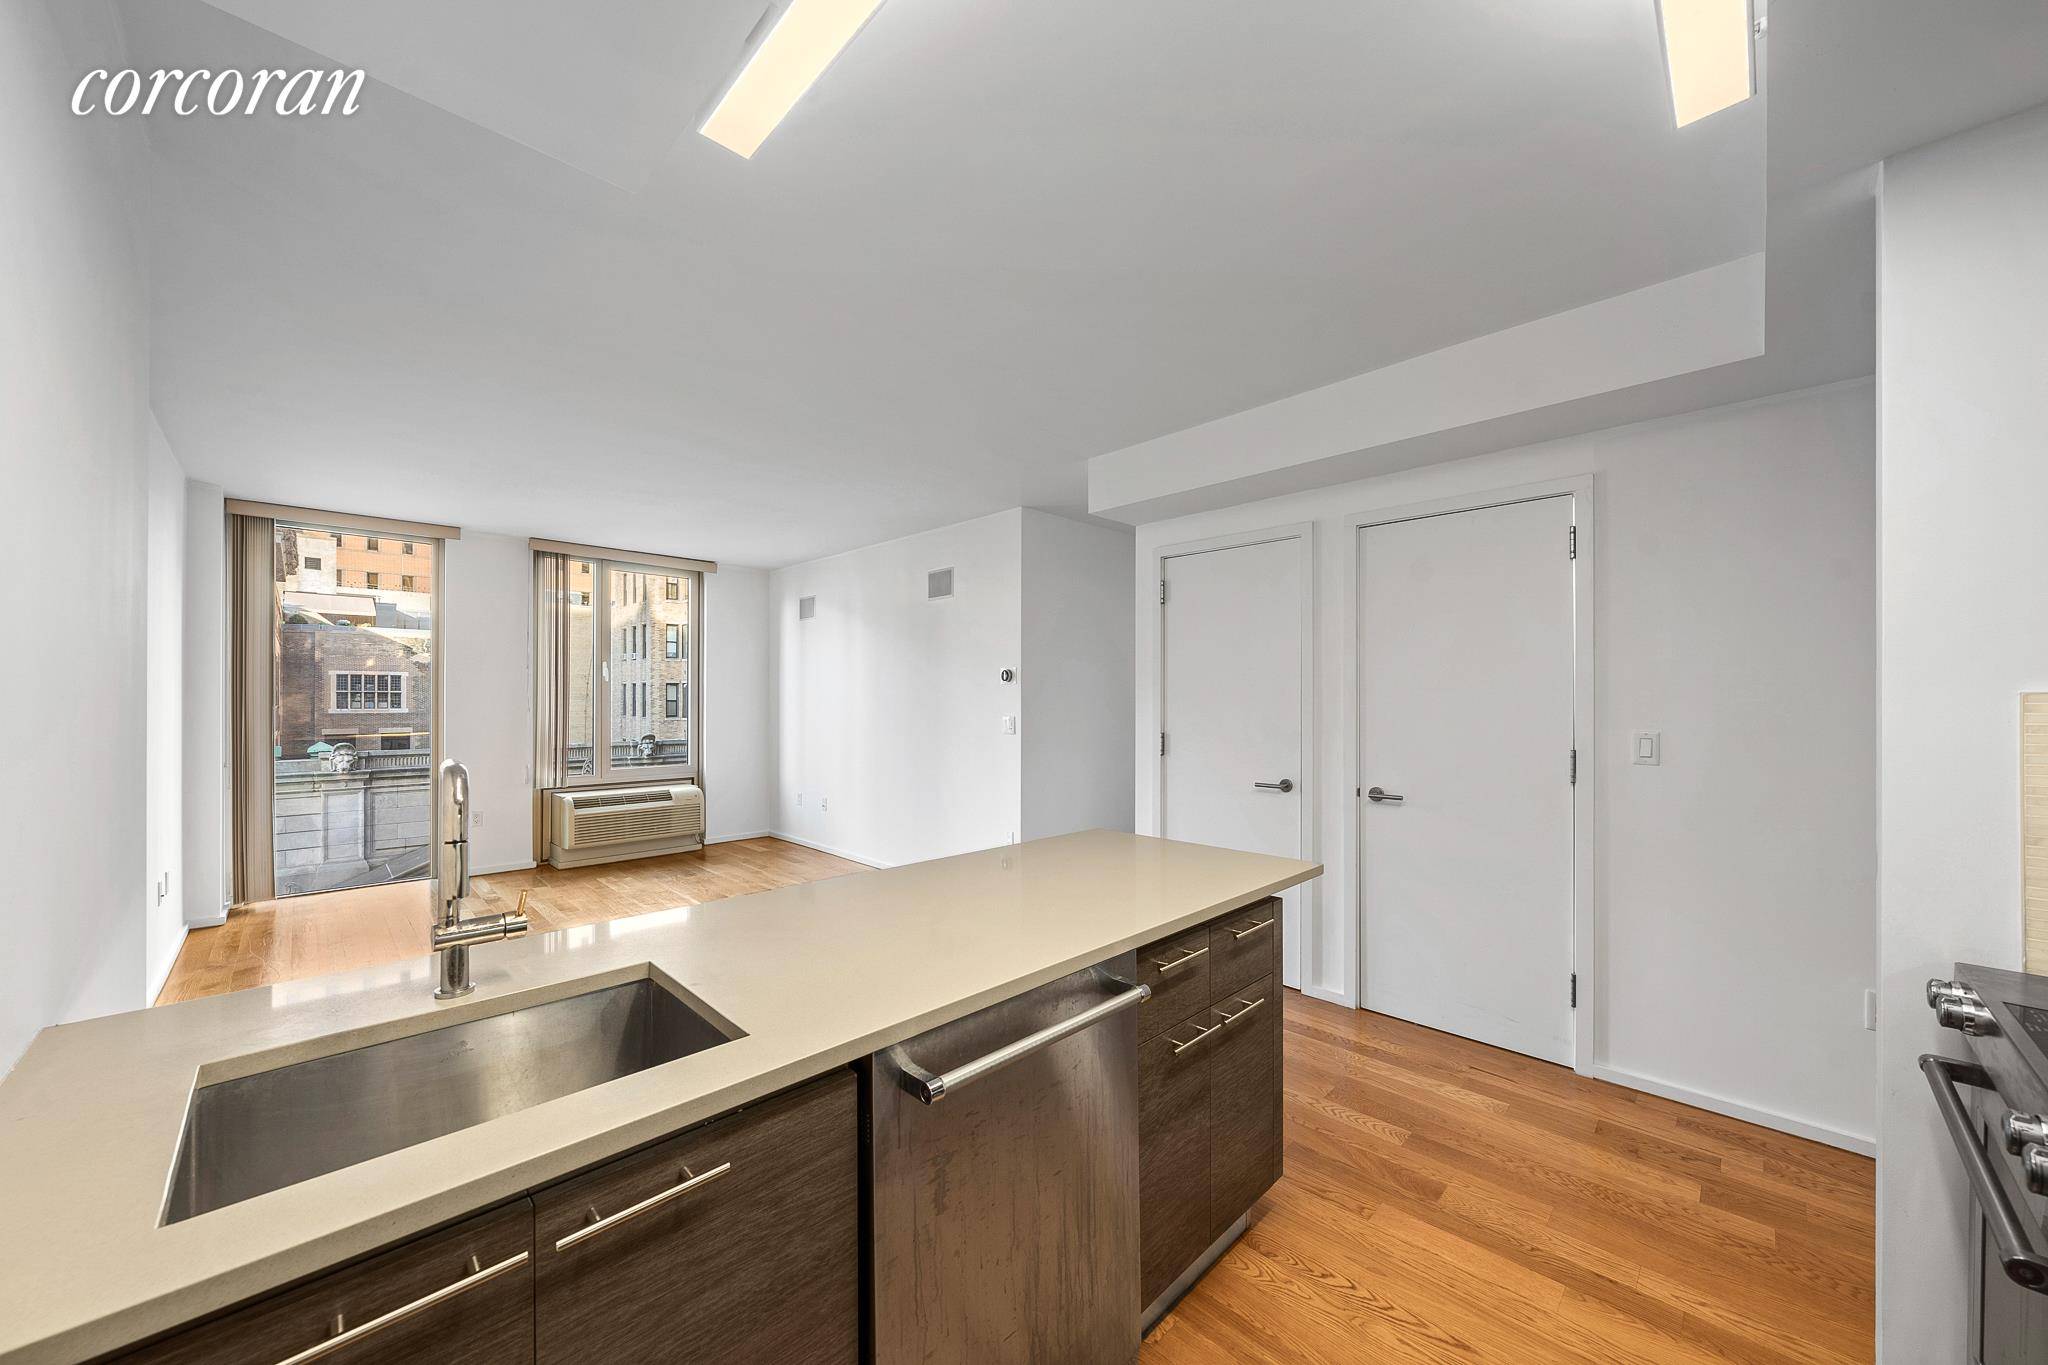 On one of the most storied streets in all of New York City, 172 Montague Street is ready to welcome you home at the end of every day.